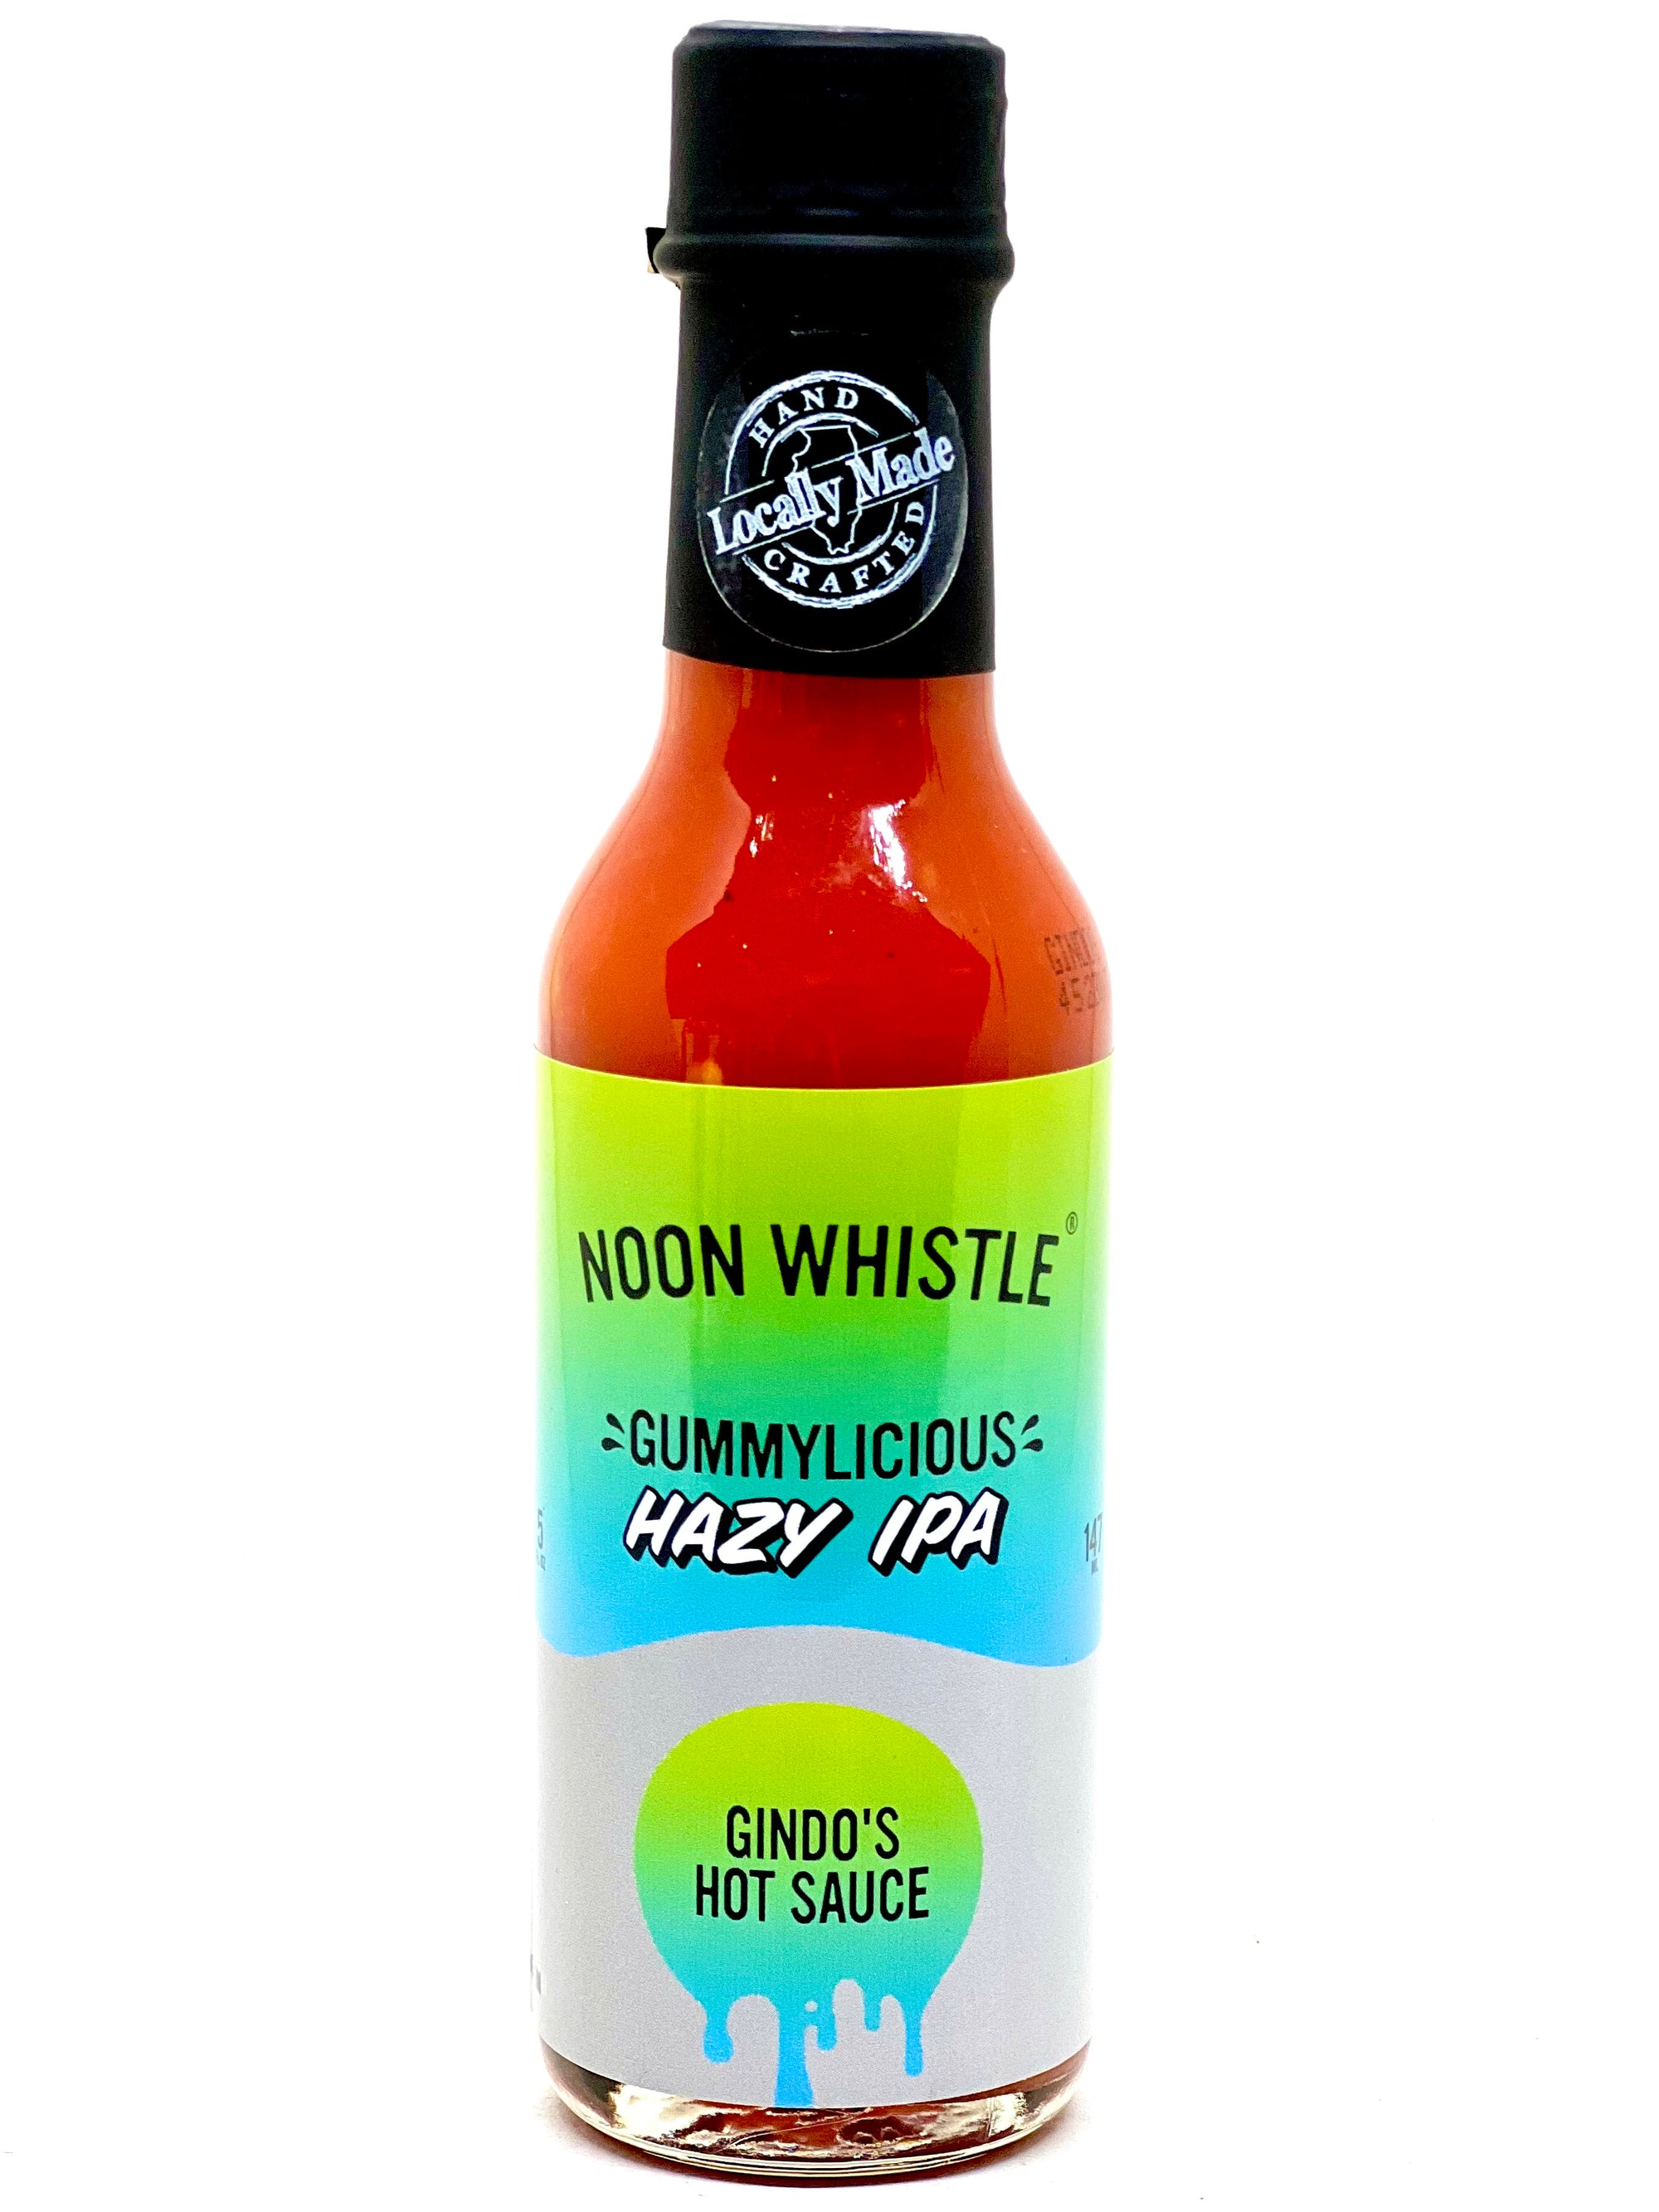 Noon Whistle Gummylicious Hot Sauce